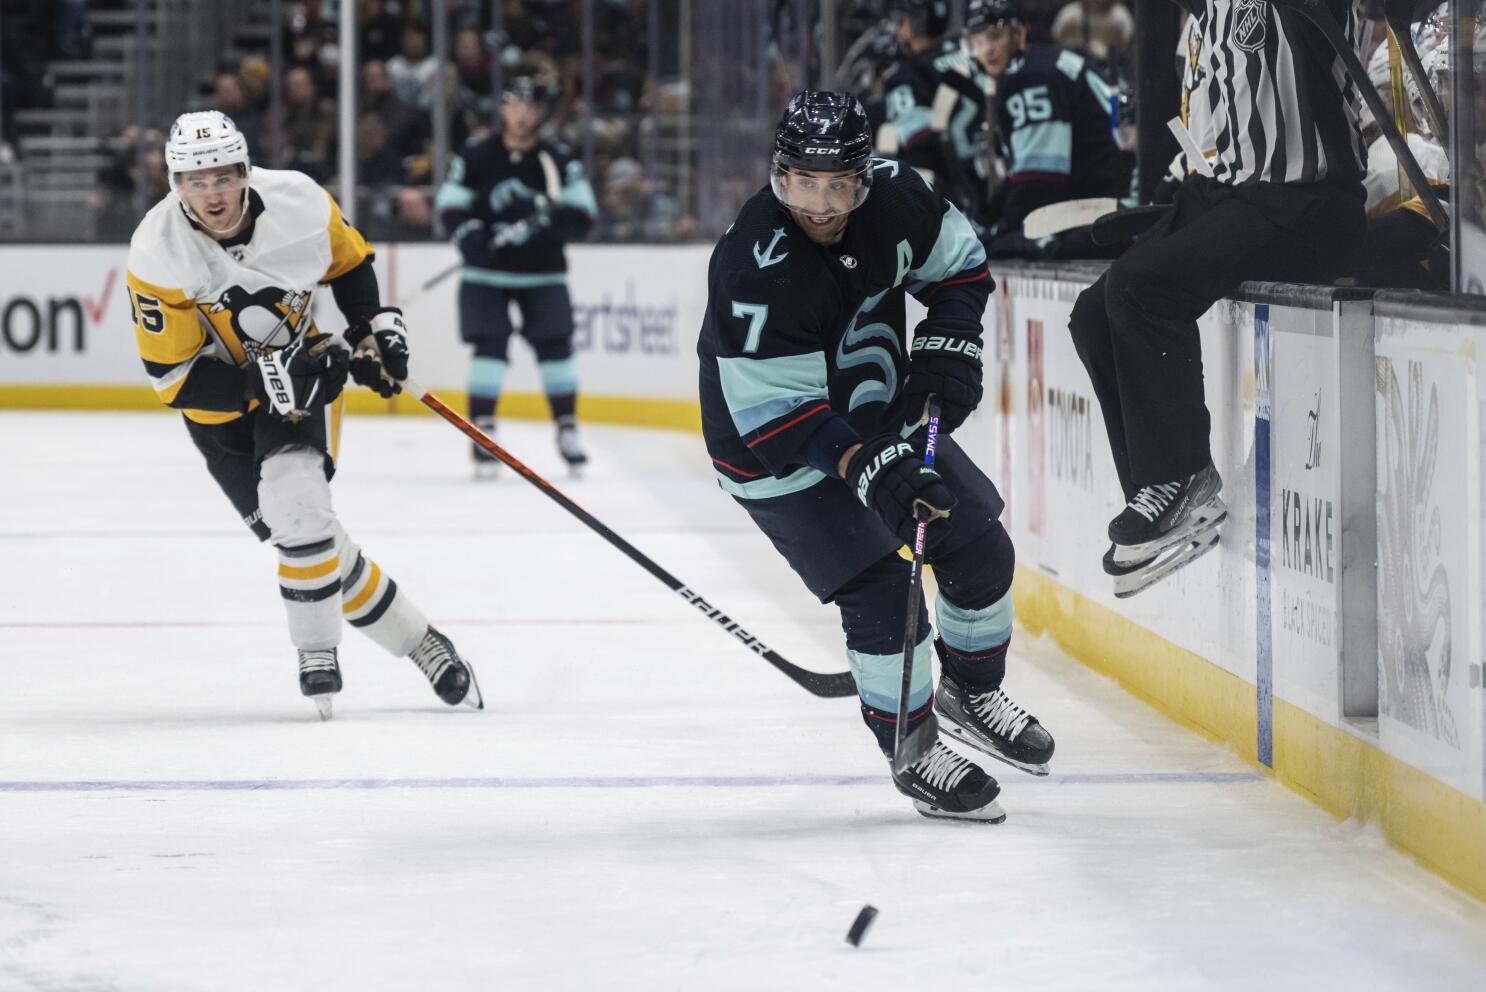 Roundup: Penguins' victory earns No. 4 seed - The Boston Globe